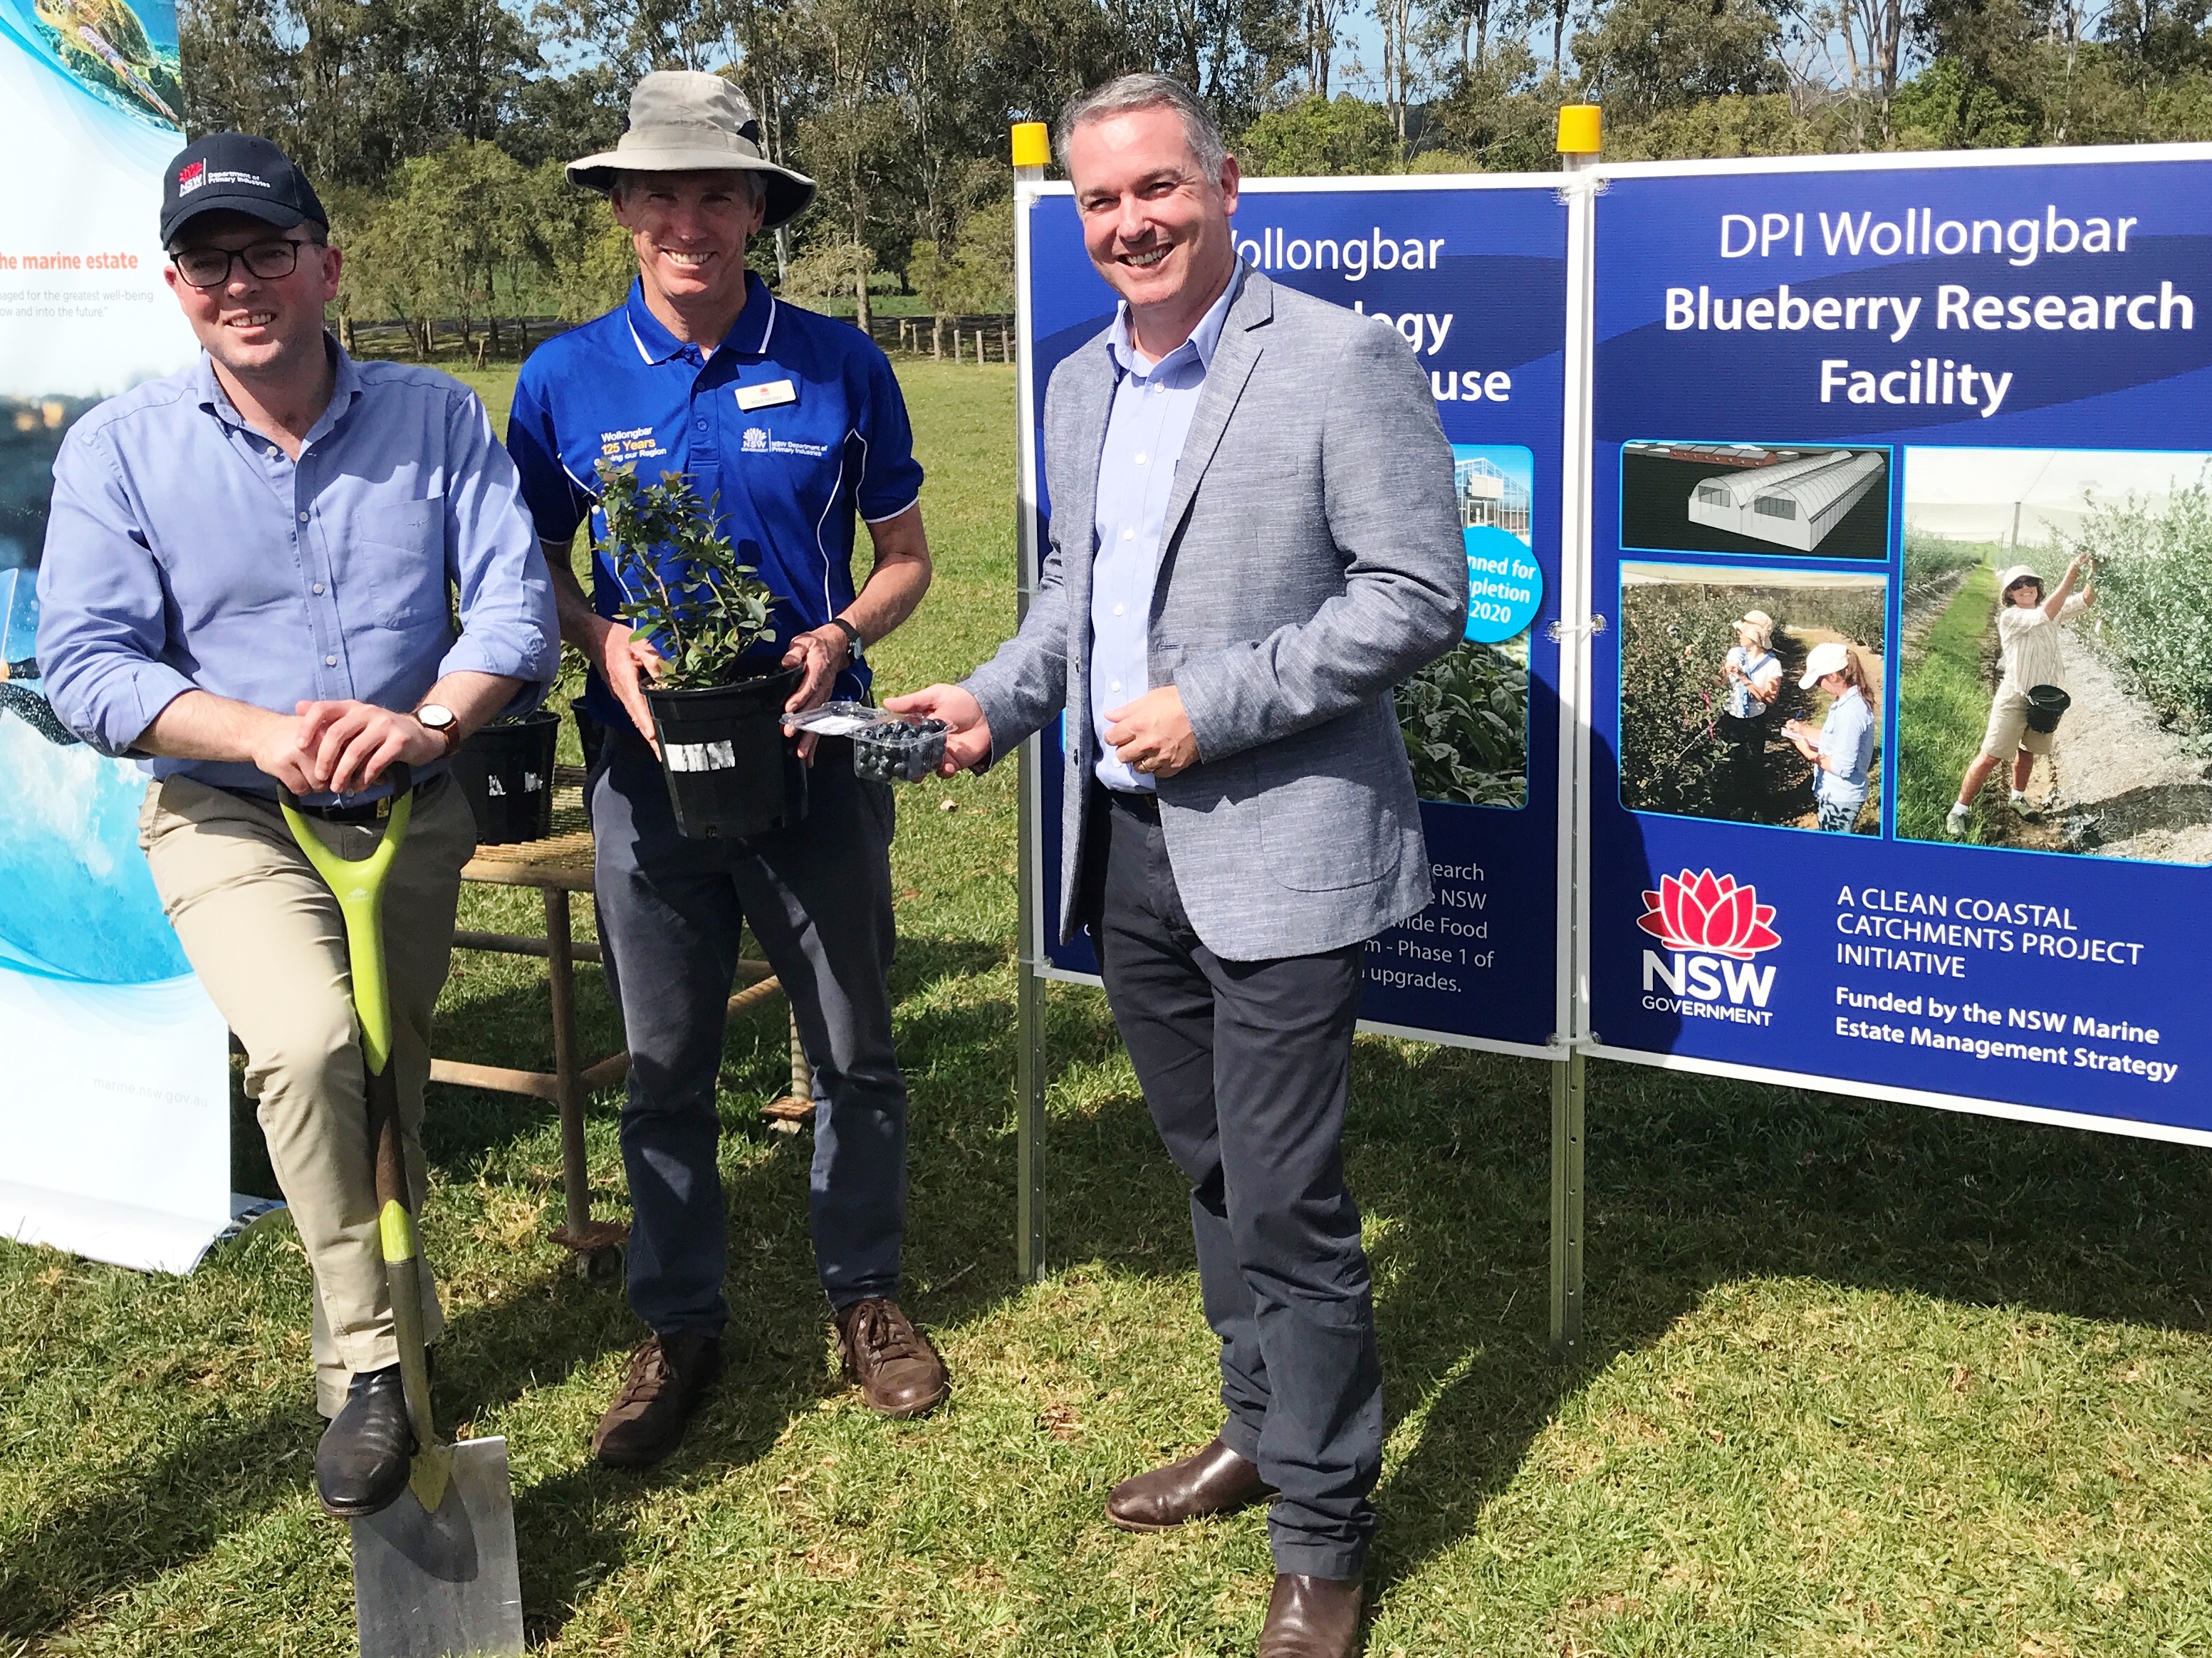 NSW Minister for Agriculture Adam Marshall, Wollongbar Institute Director Mark Hickey and DPI DG Scott Hansen turn the first sod on construction of new DPI Wollongbar Blueberry Research Facility